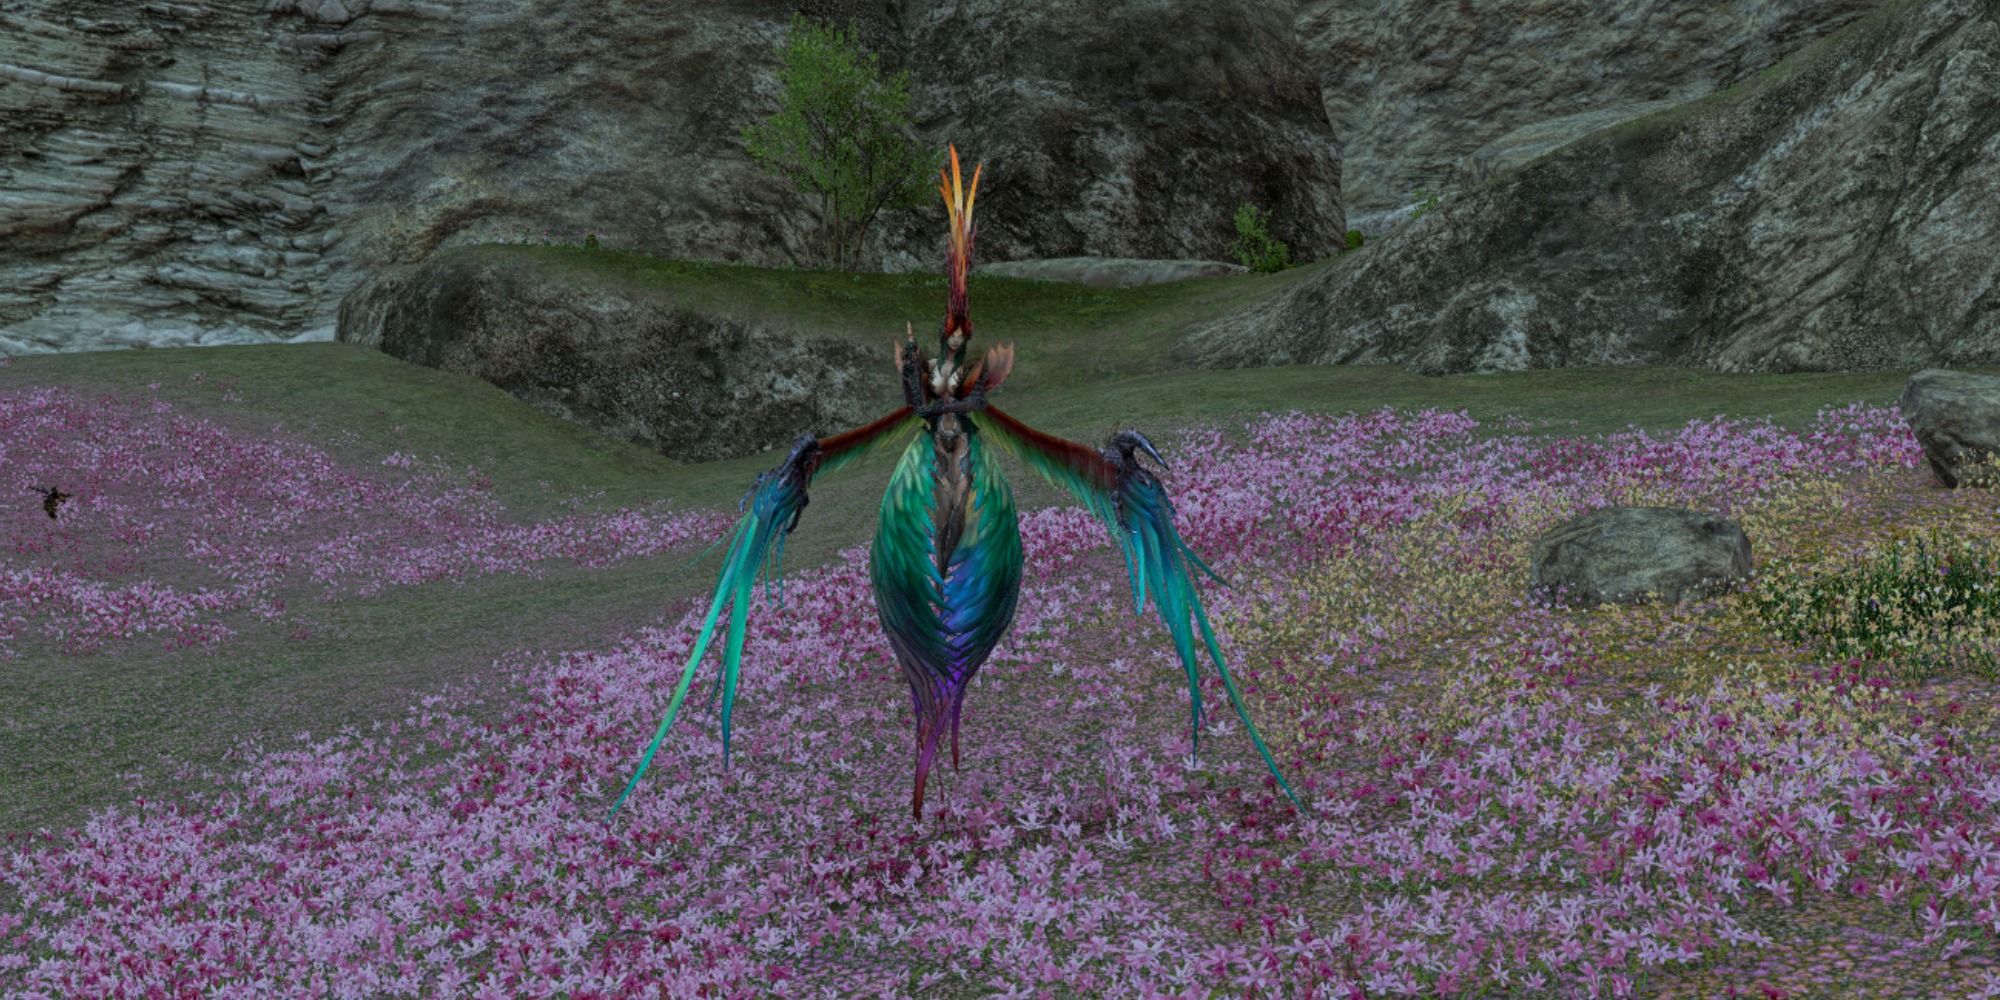 The Aglaope in Final Fantasy 14: Shadowbringers